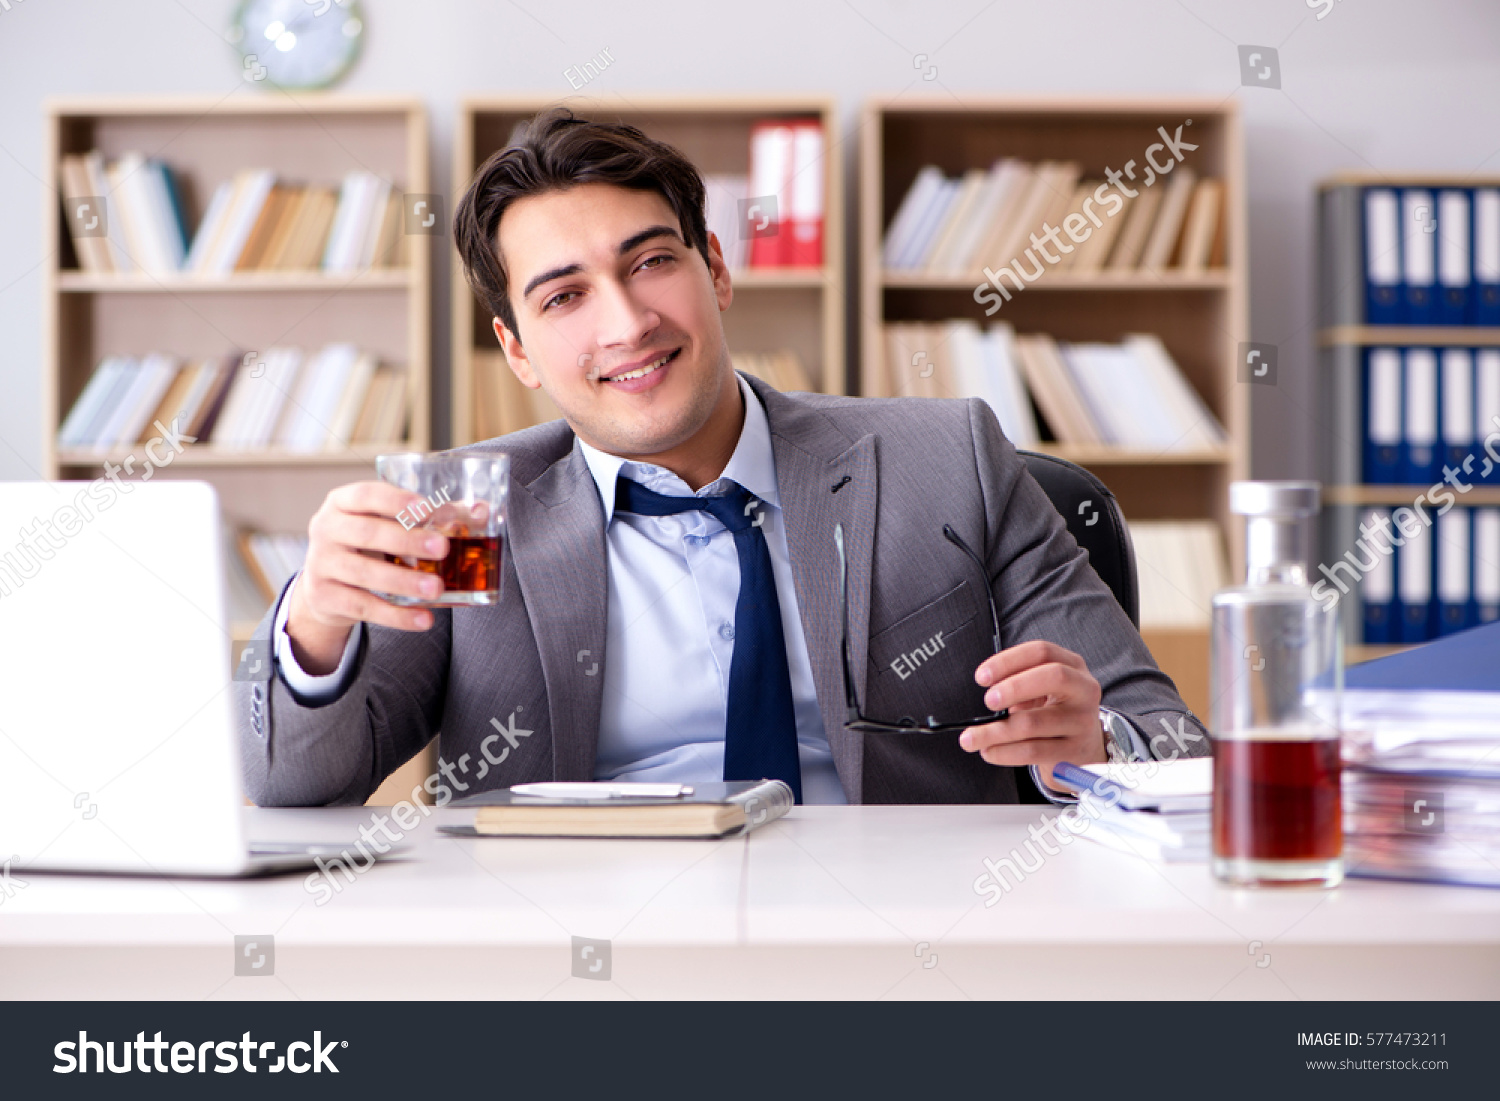 Young businessman drinking from stress #577473211